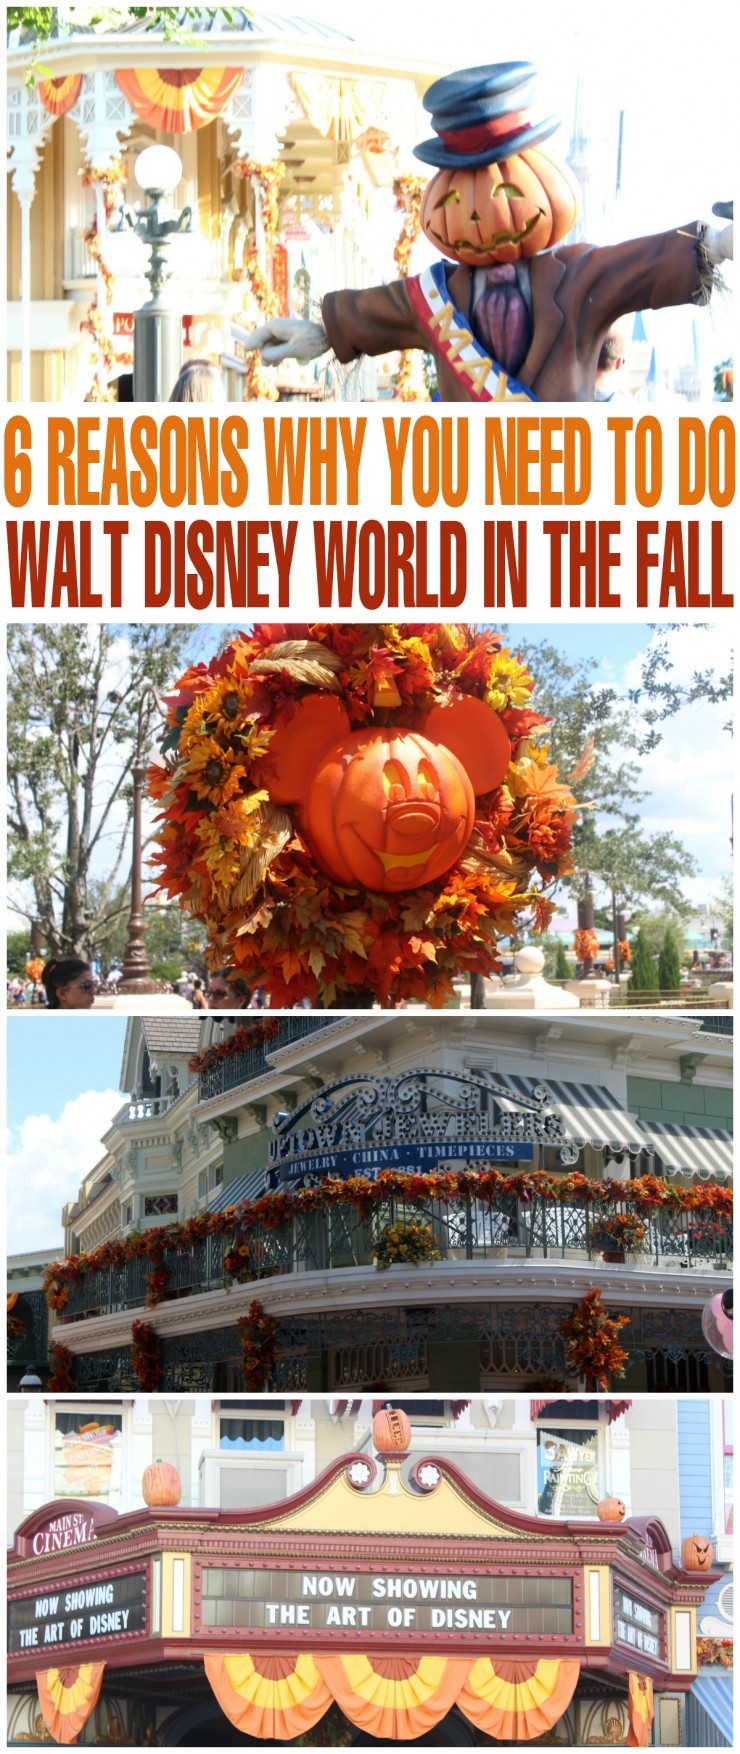 6 Reasons Why You Need to Do Walt Disney World in the Fall - take a family trip to Florida and visit the Magic Kingdom in Autumn! 